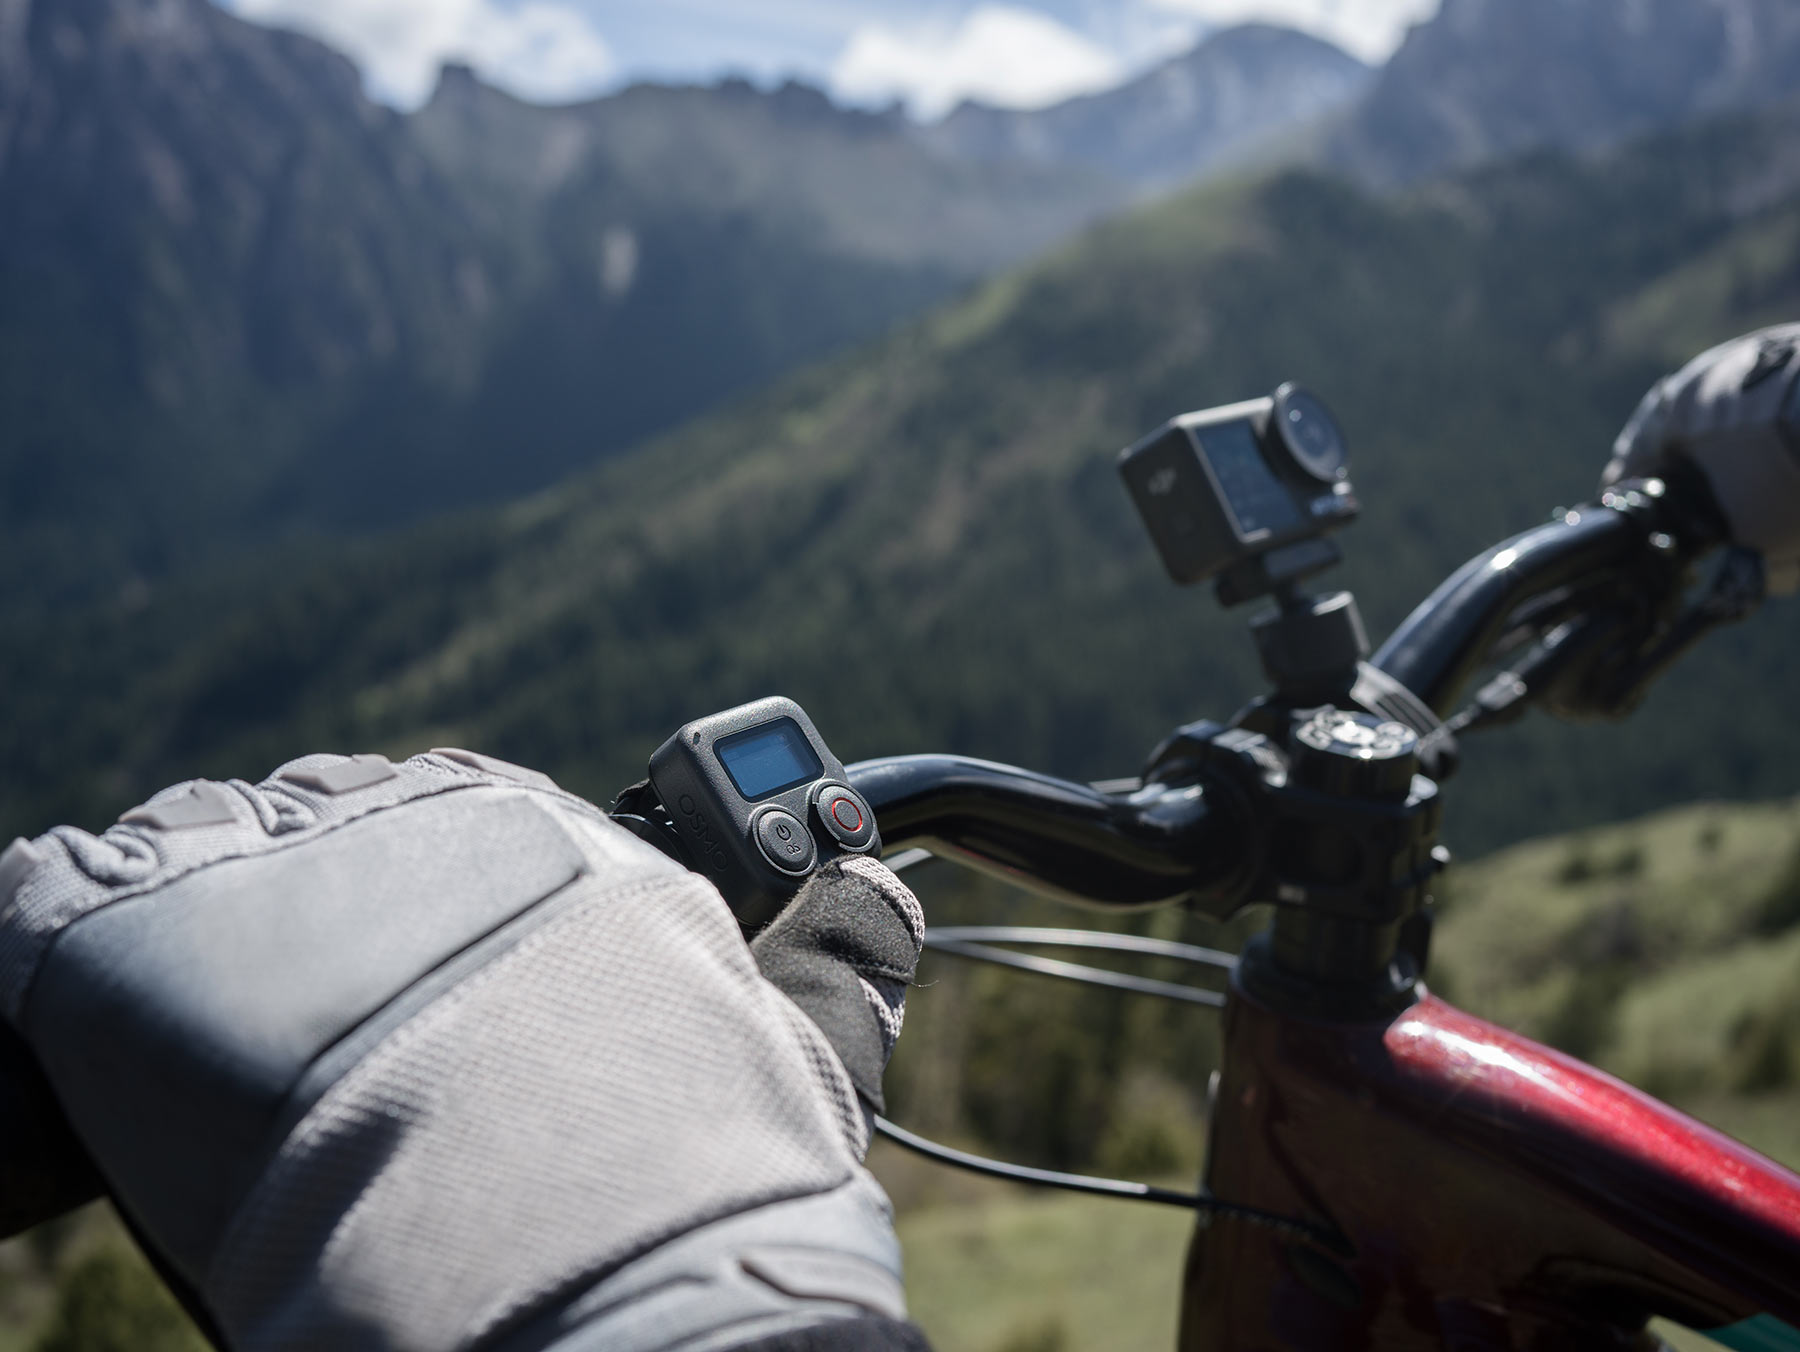 DJI Osmo Action 4 camera shown with GPS bluetooth remote on a MTB handlebar